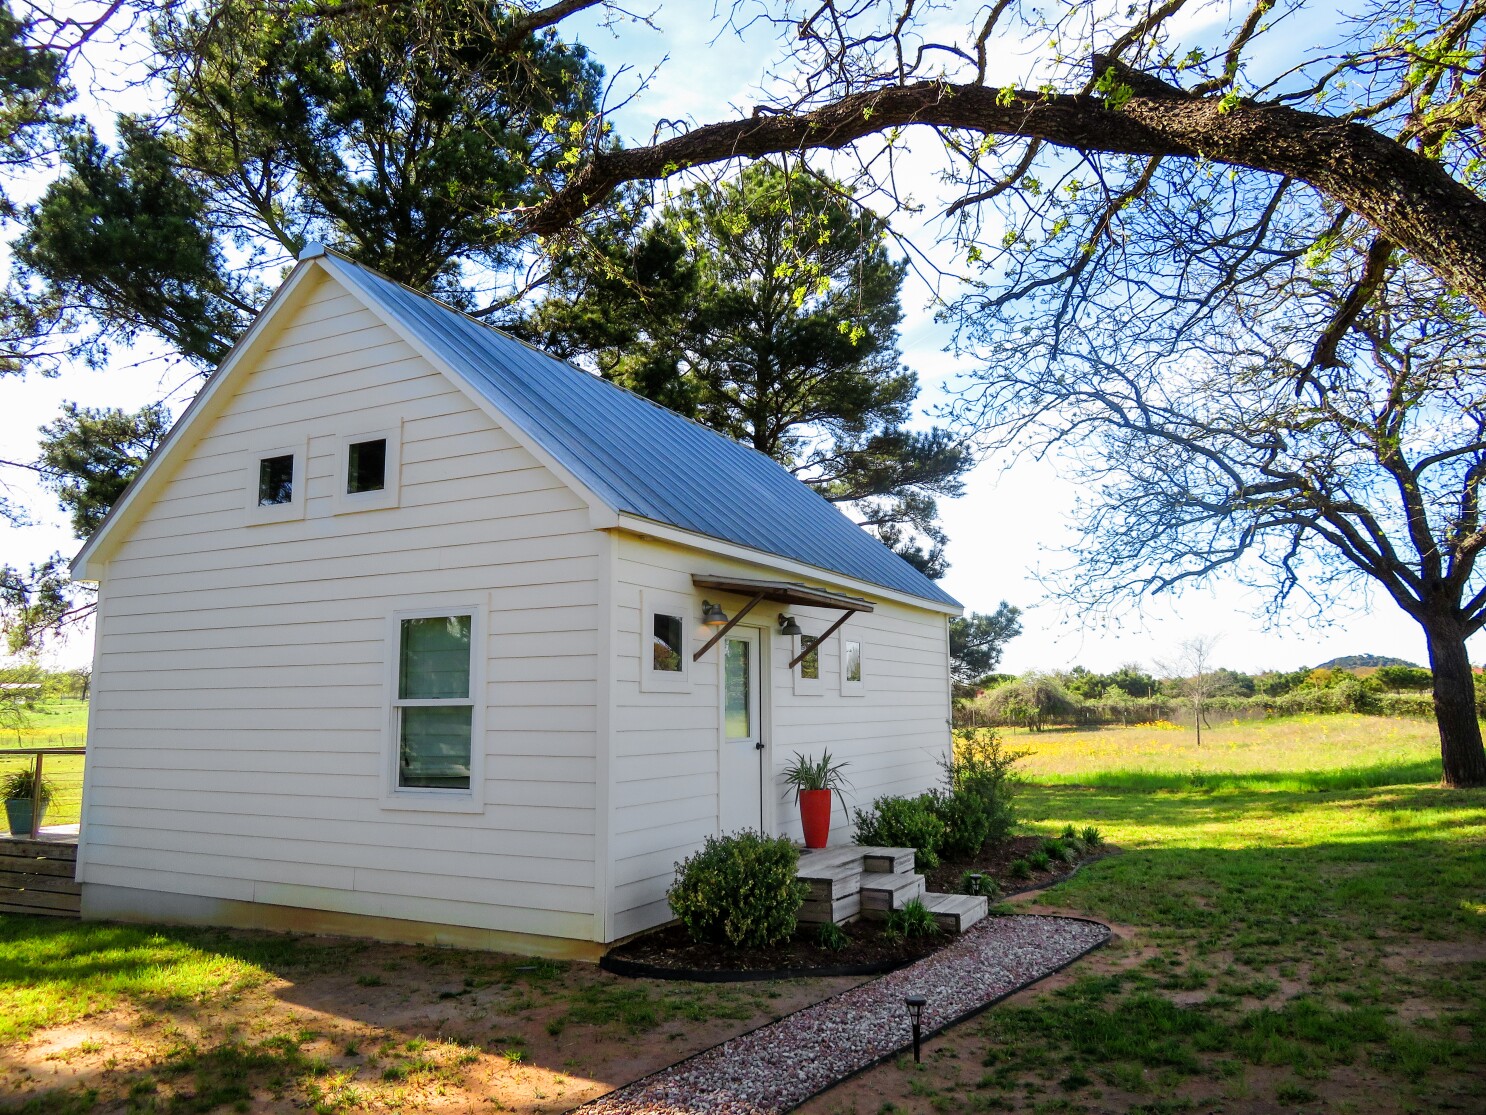 In Fredericksburg Texas Staying In Tiny Houses Brings Big Pleasures Los Angeles Times,White Sweet Potato Plant